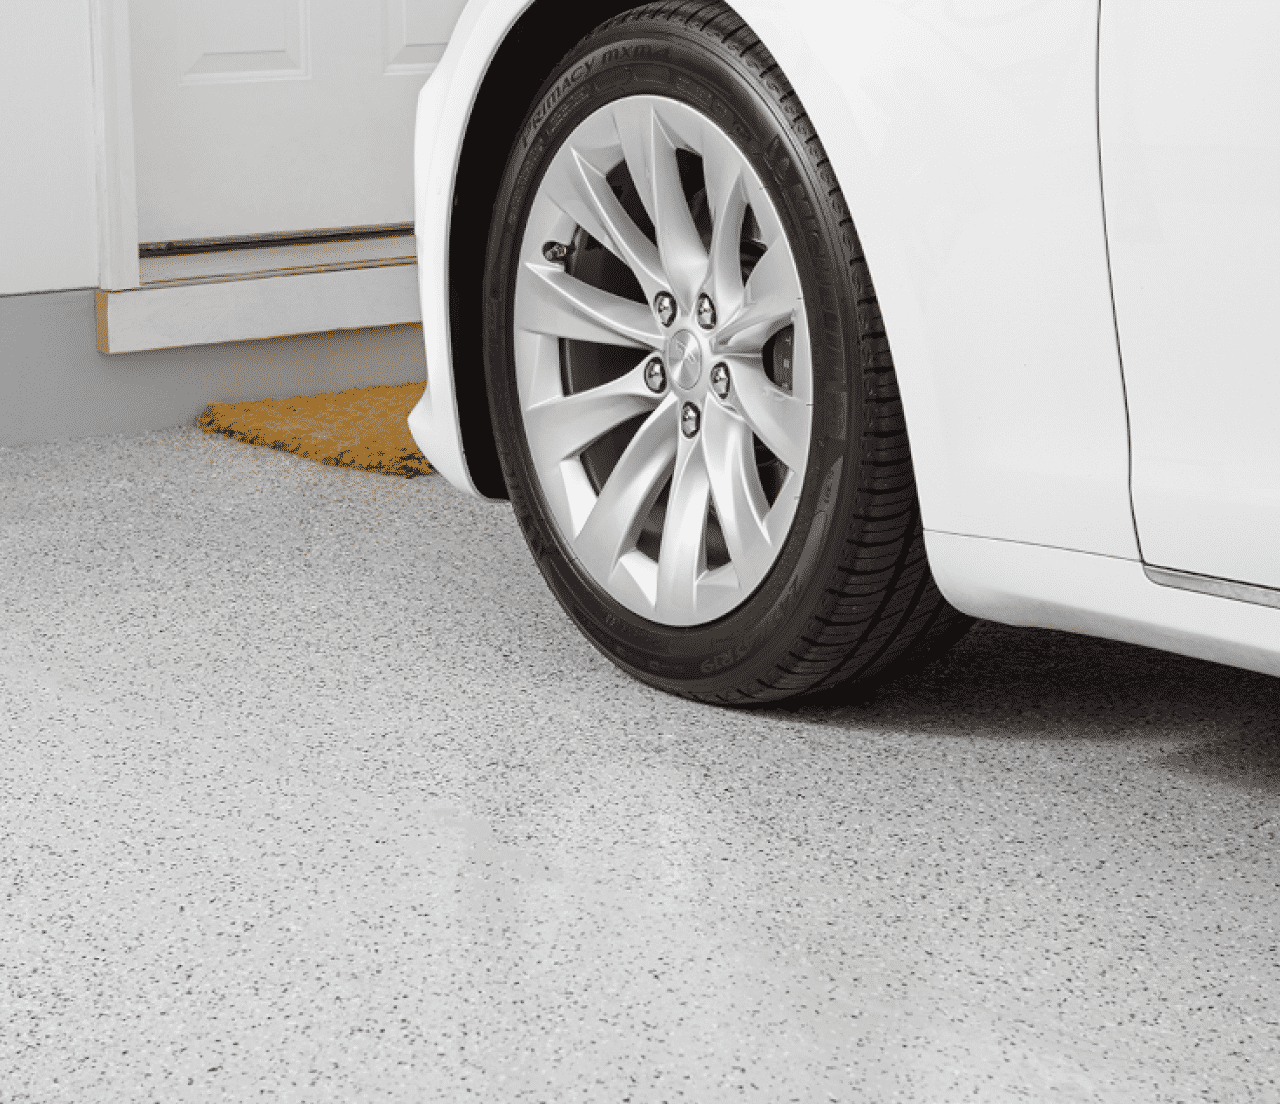 A white car in a garage with concrete flooring.